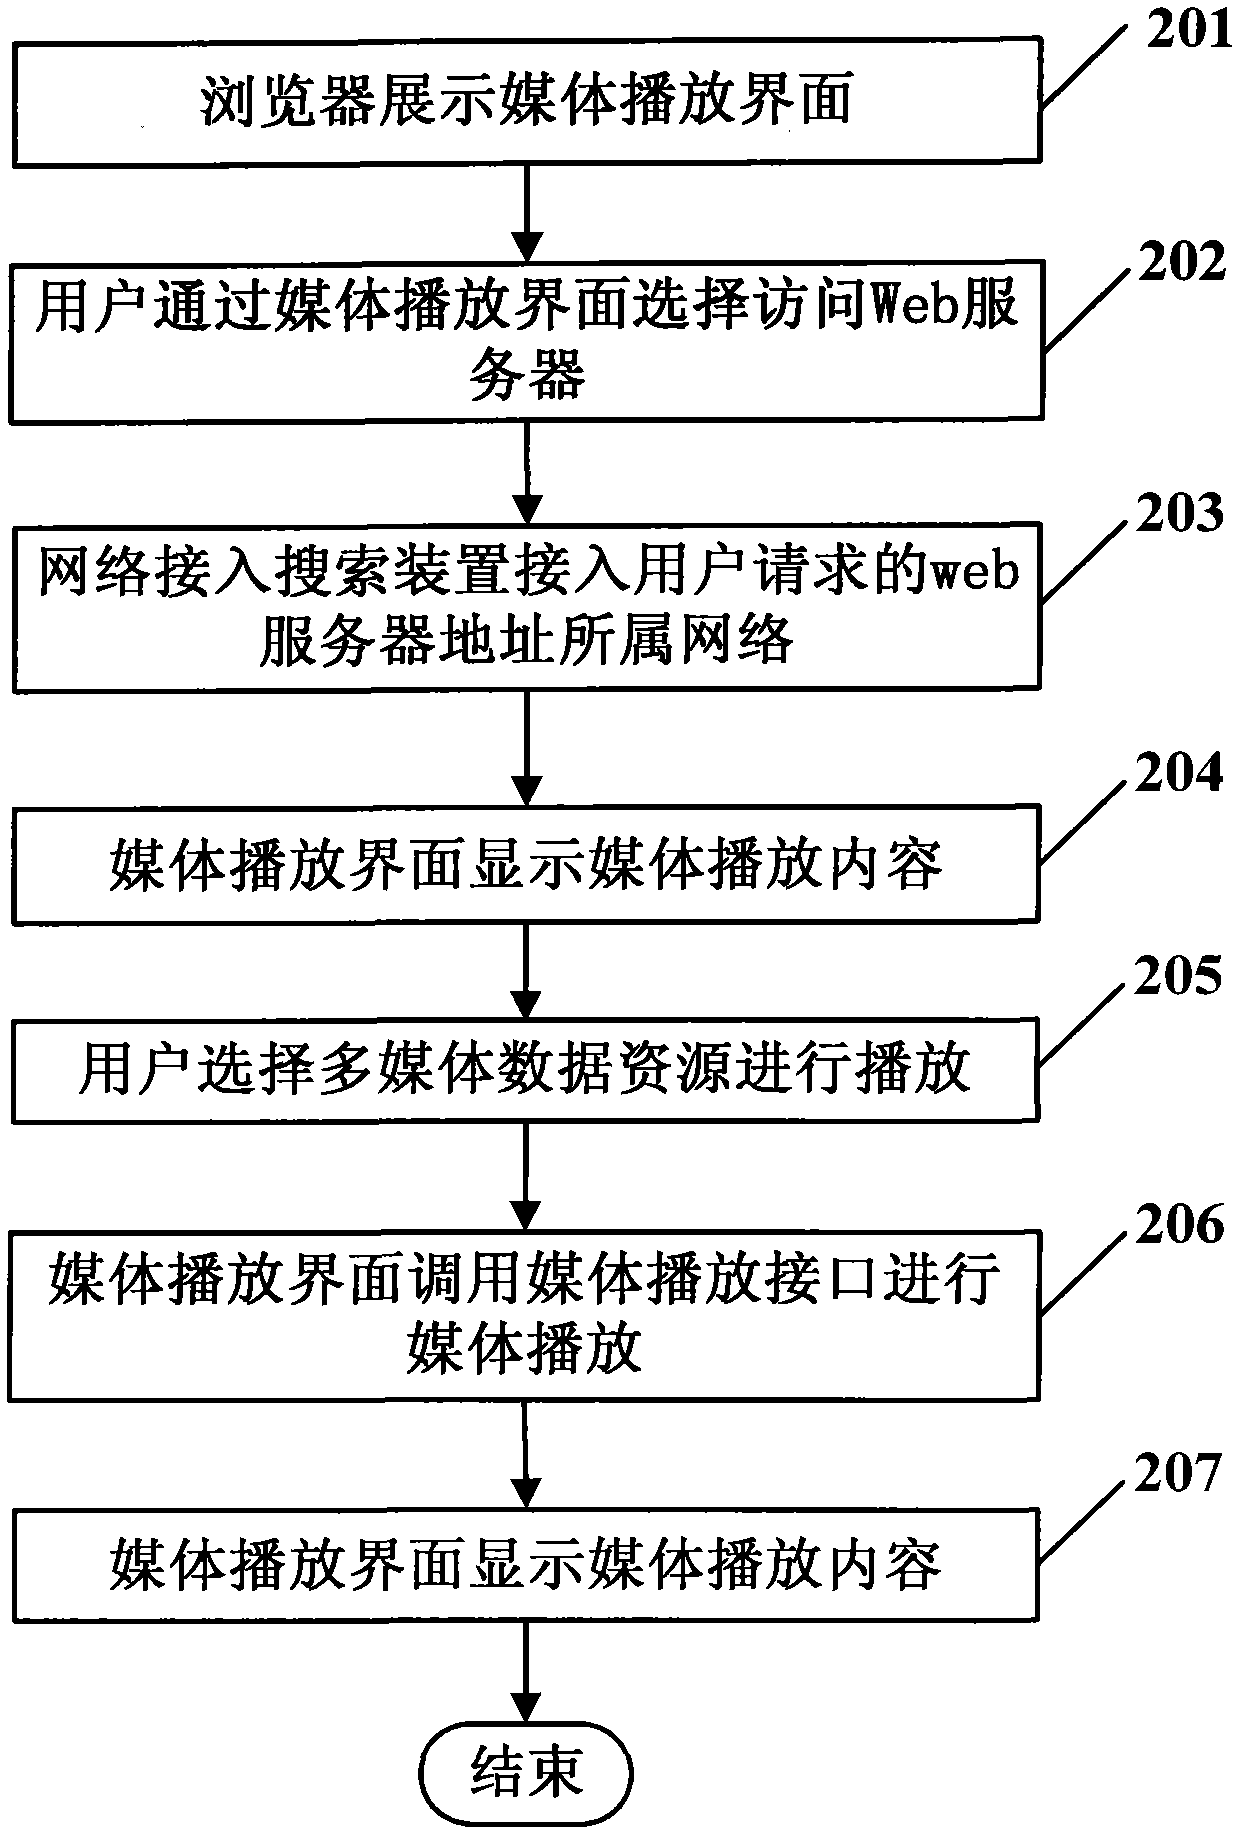 Browser-based media play system and method